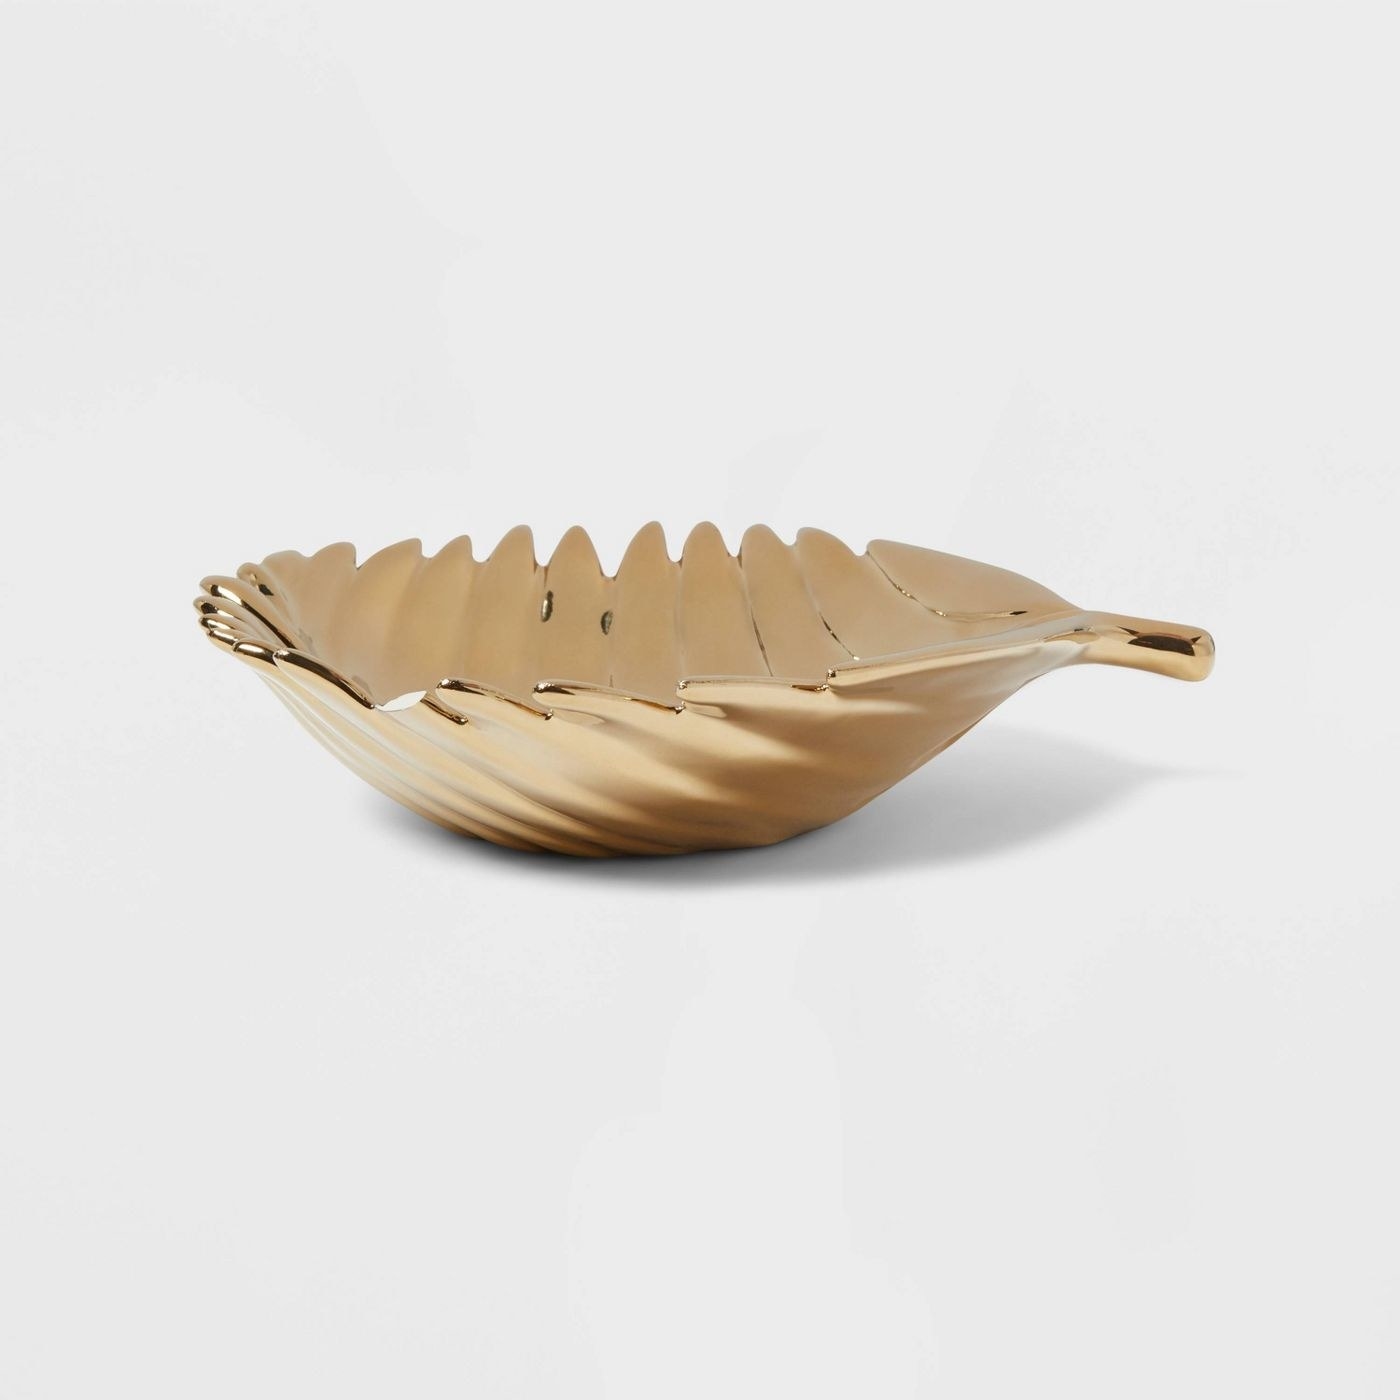 The tray, which is slightly rounded, gold-toned, and shaped like a leaf